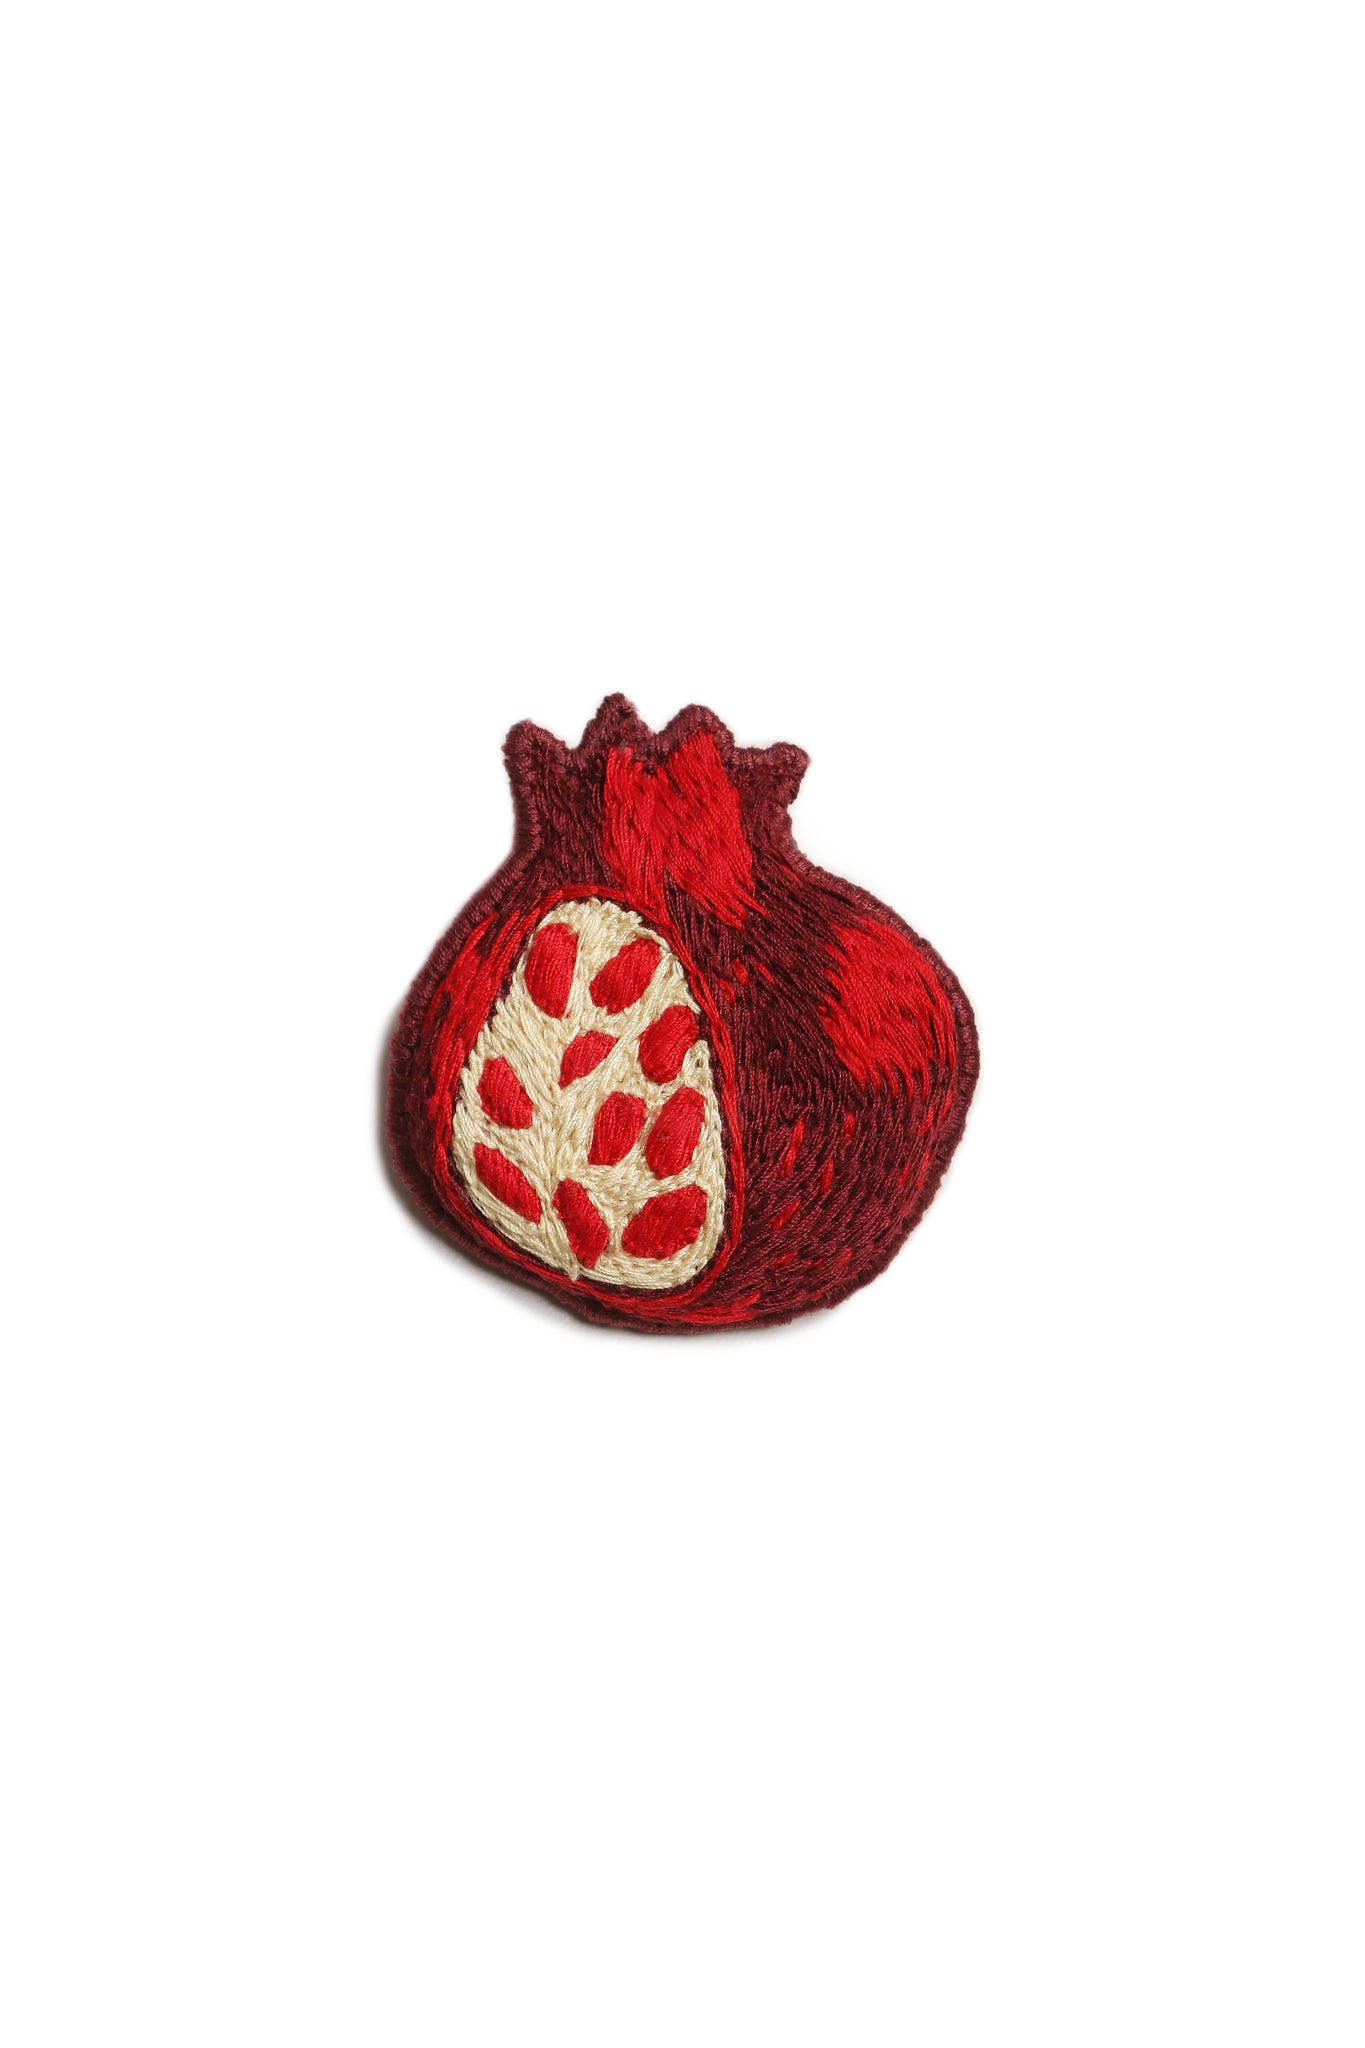 Pomegranate Embroidery Thread Brooch